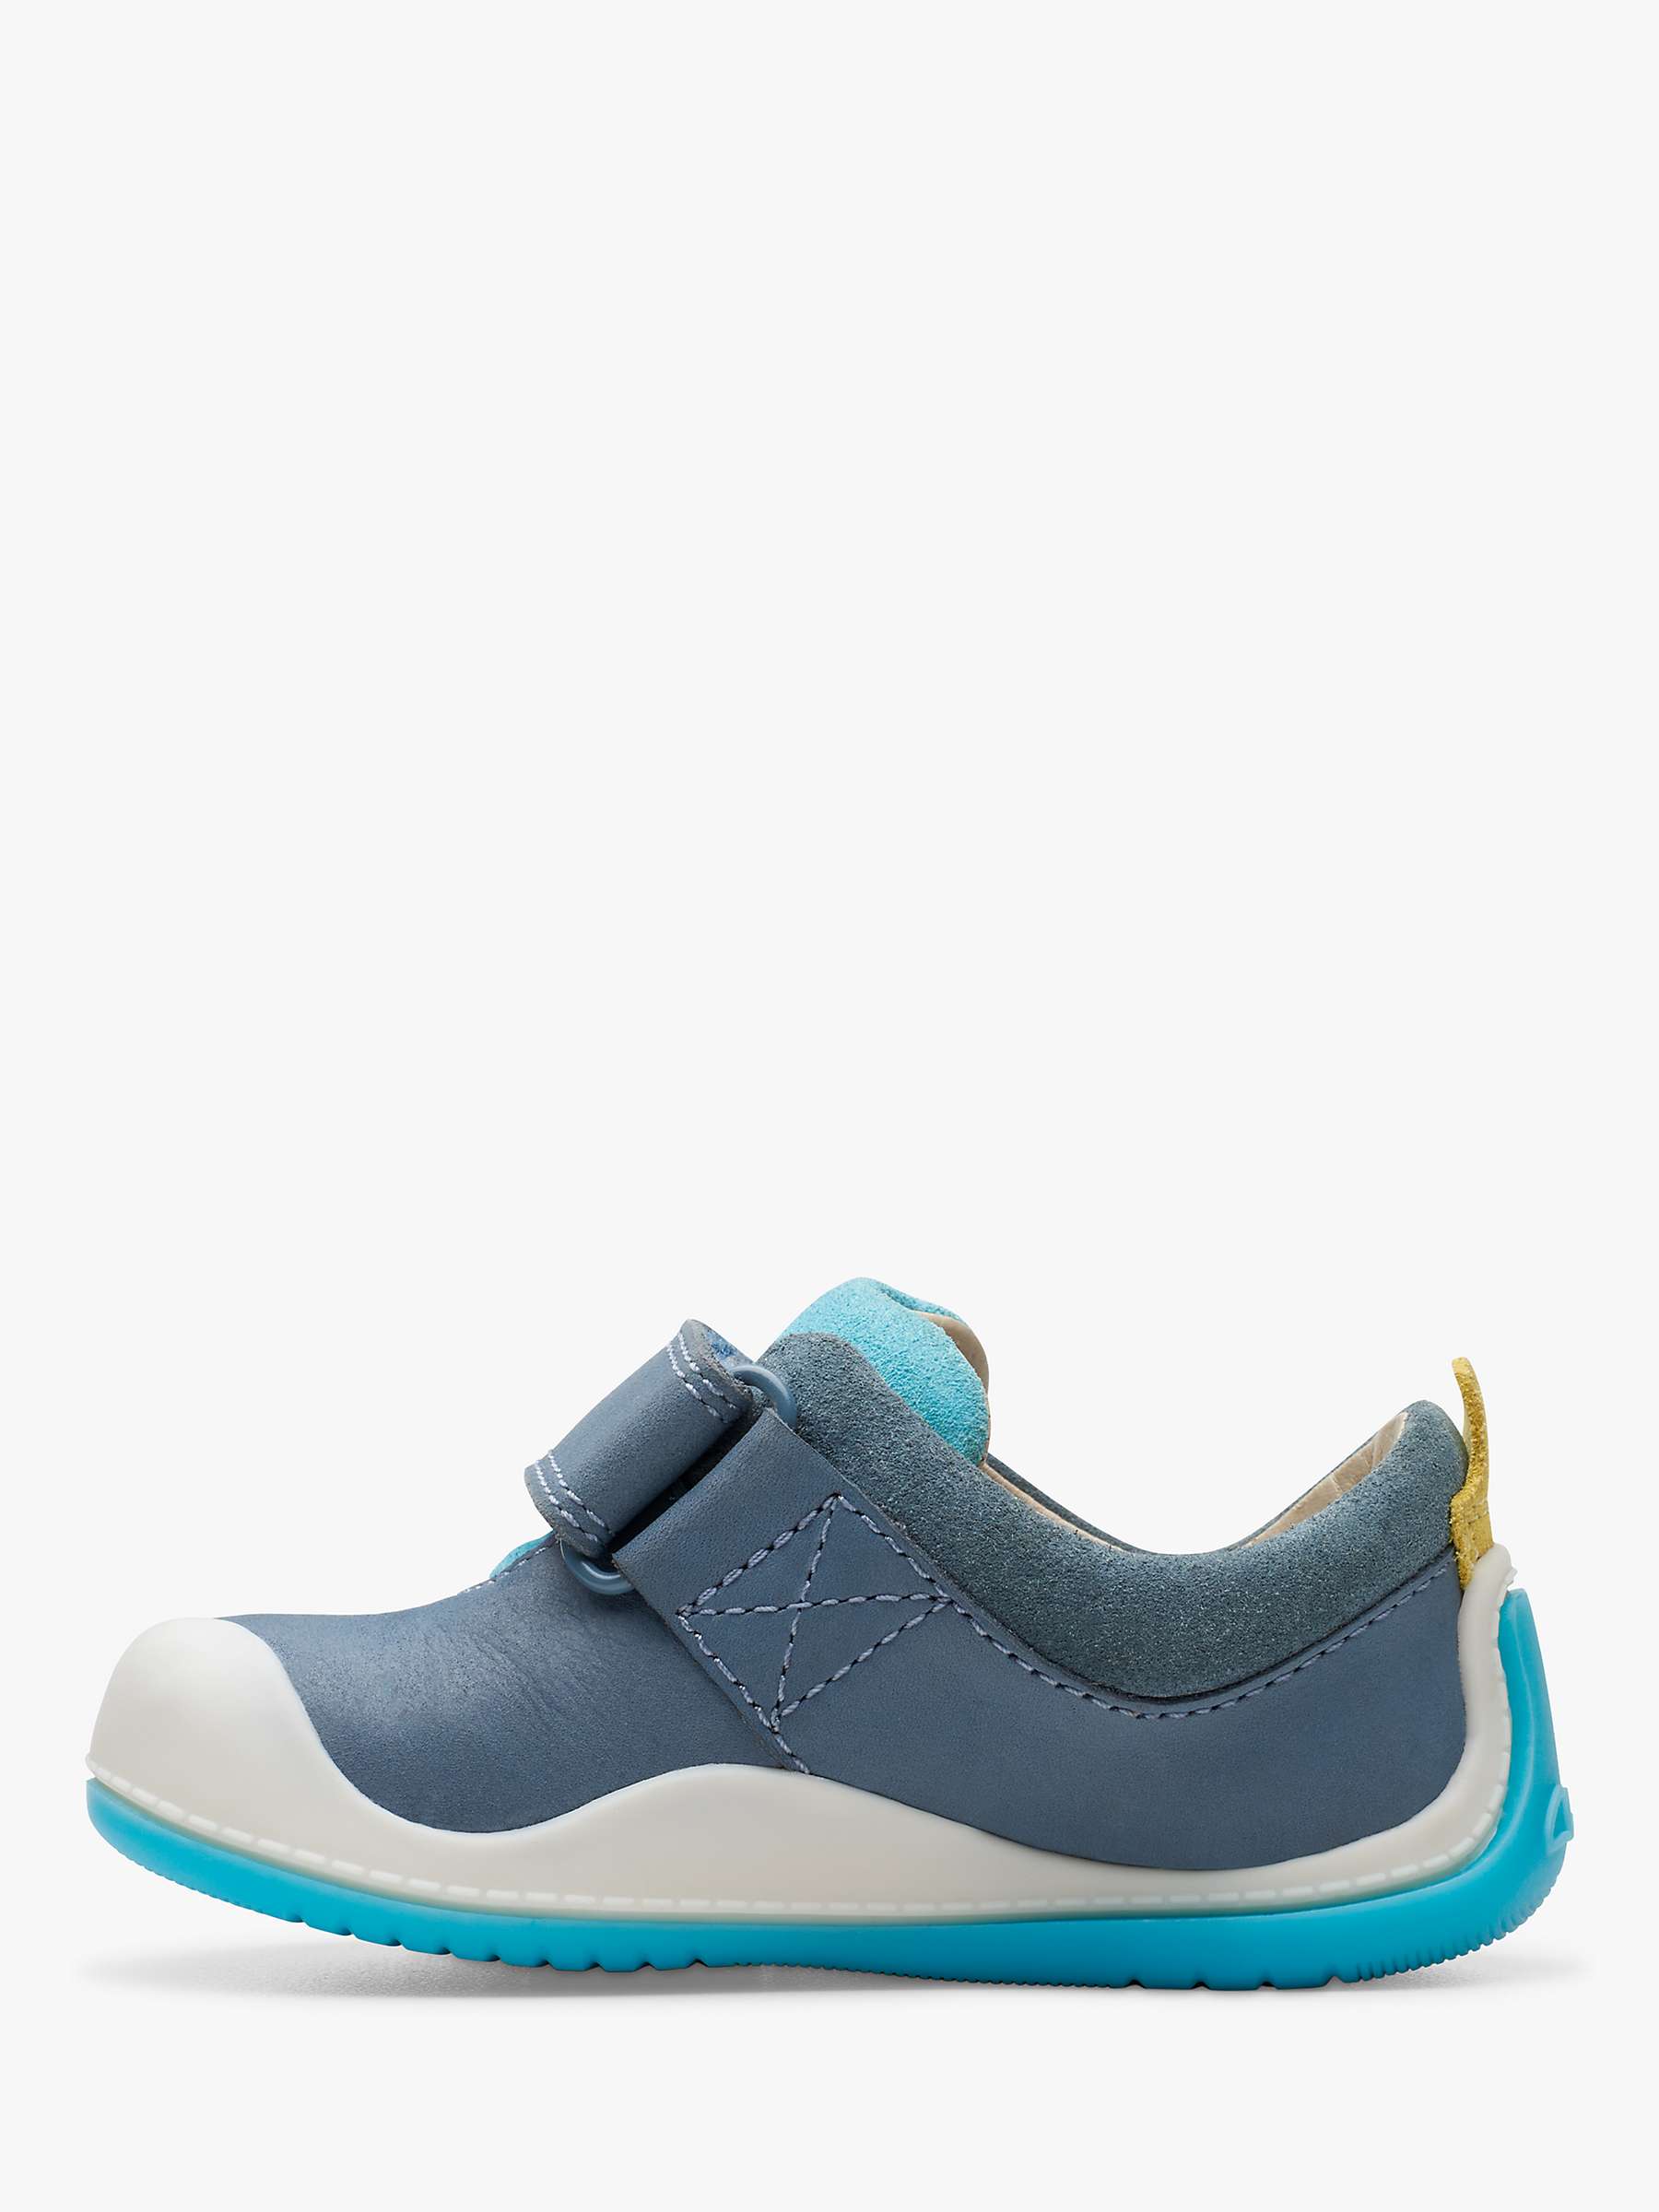 Buy Clarks Baby Roller Fun First Trainers, Steel Blue Online at johnlewis.com